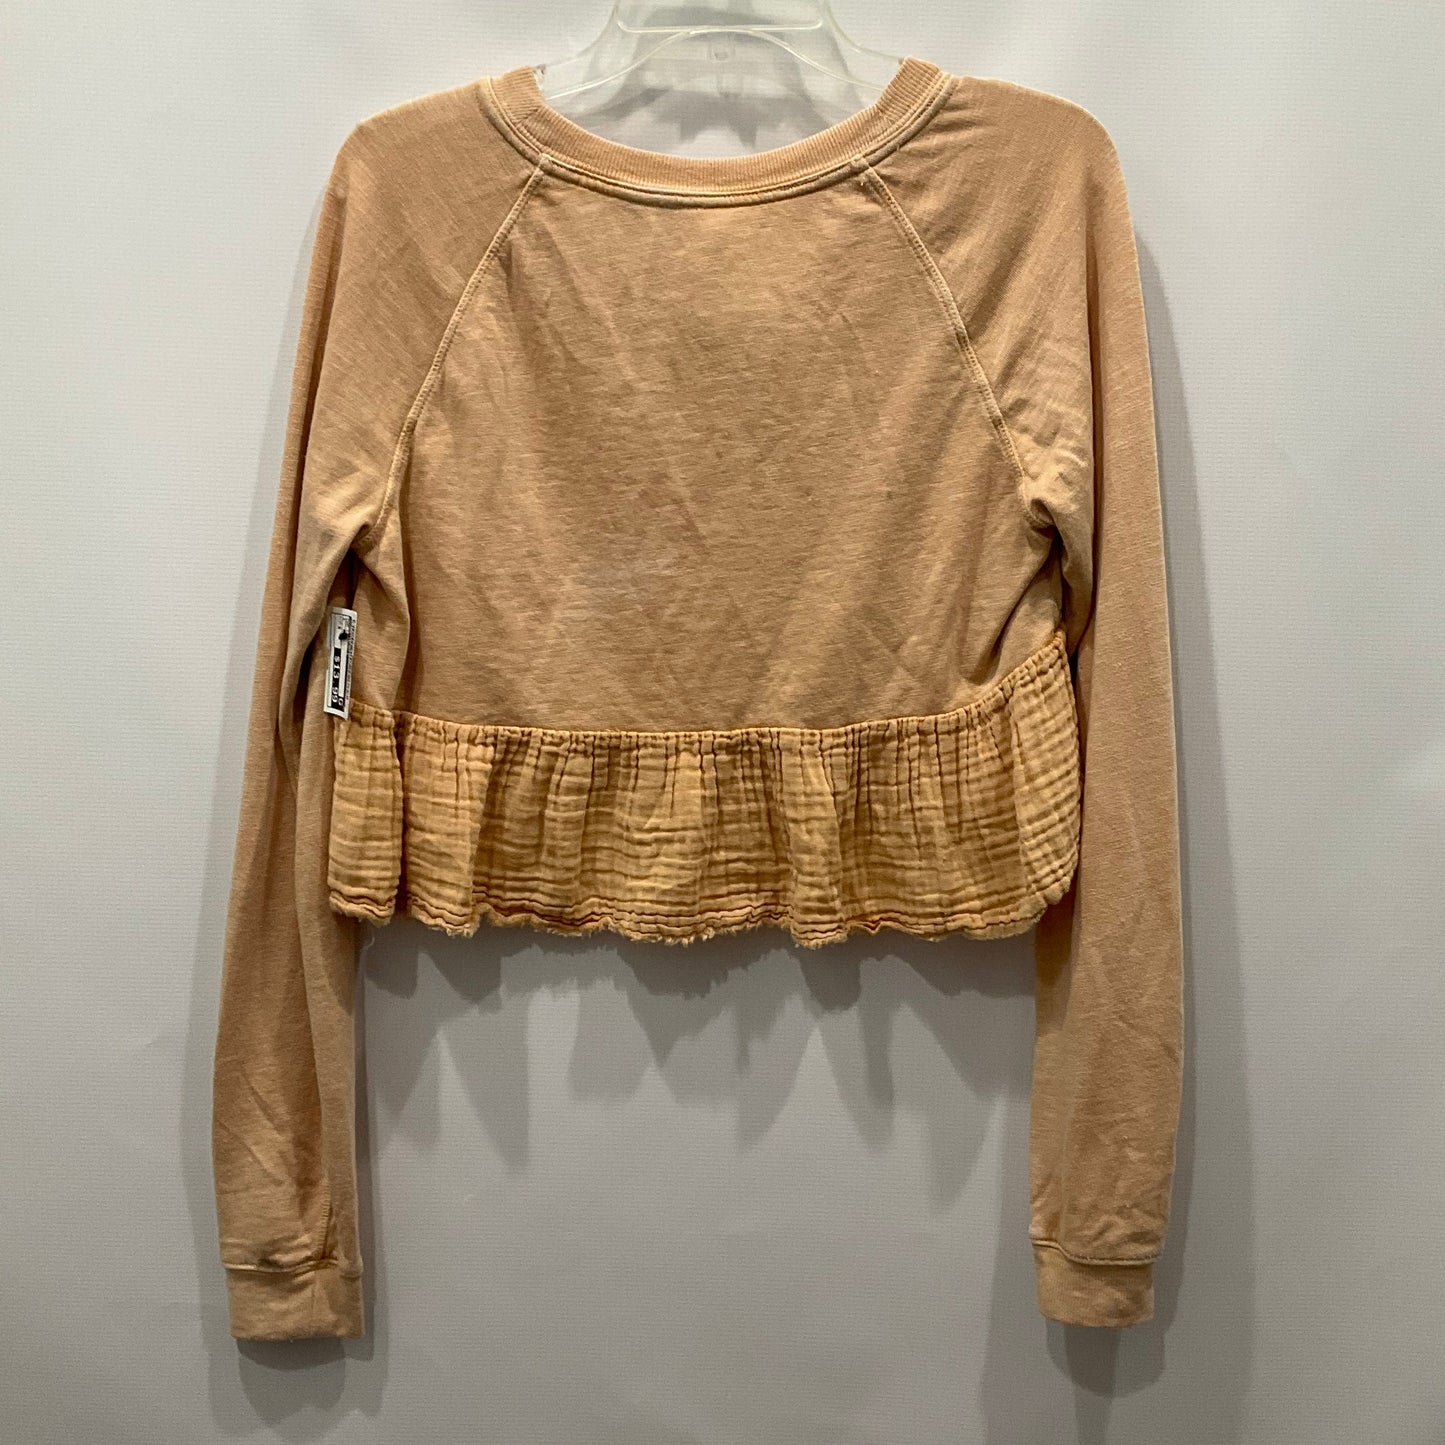 Peach Top Long Sleeve Free People, Size S